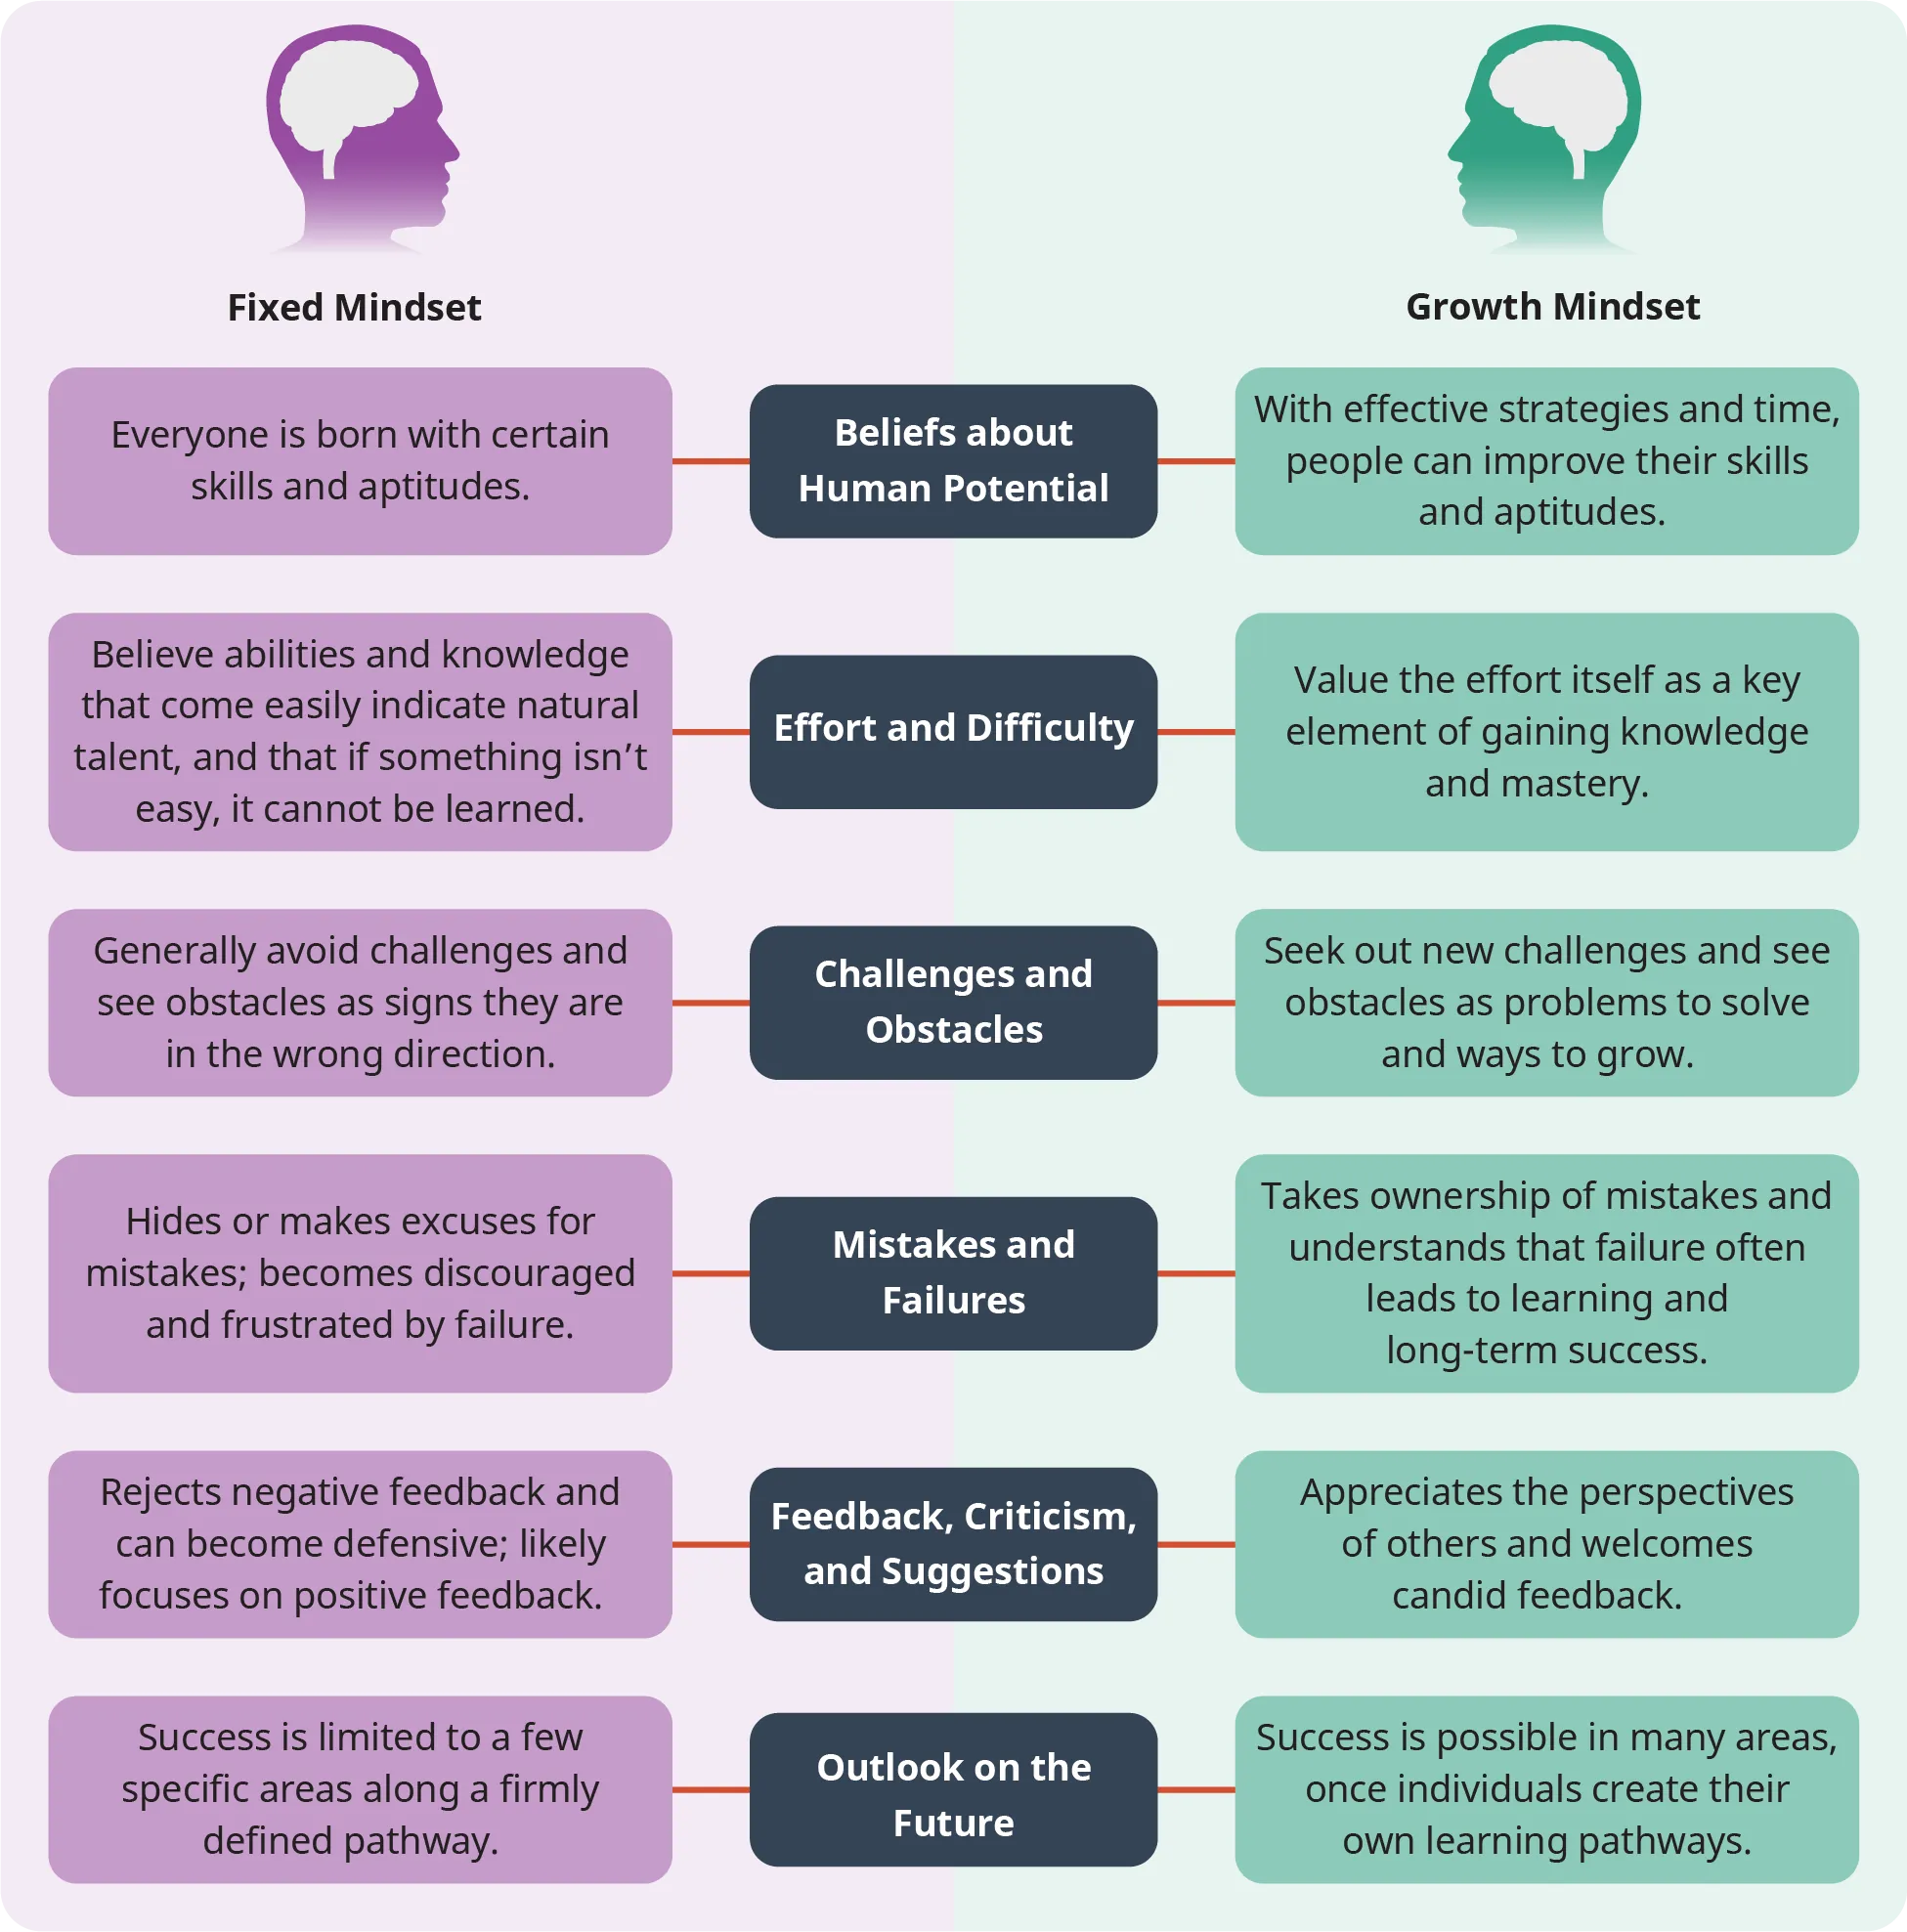 A diagram illustrates the comparison between “Fixed Mindset” and “Growth Mindset” based on six different parameters.